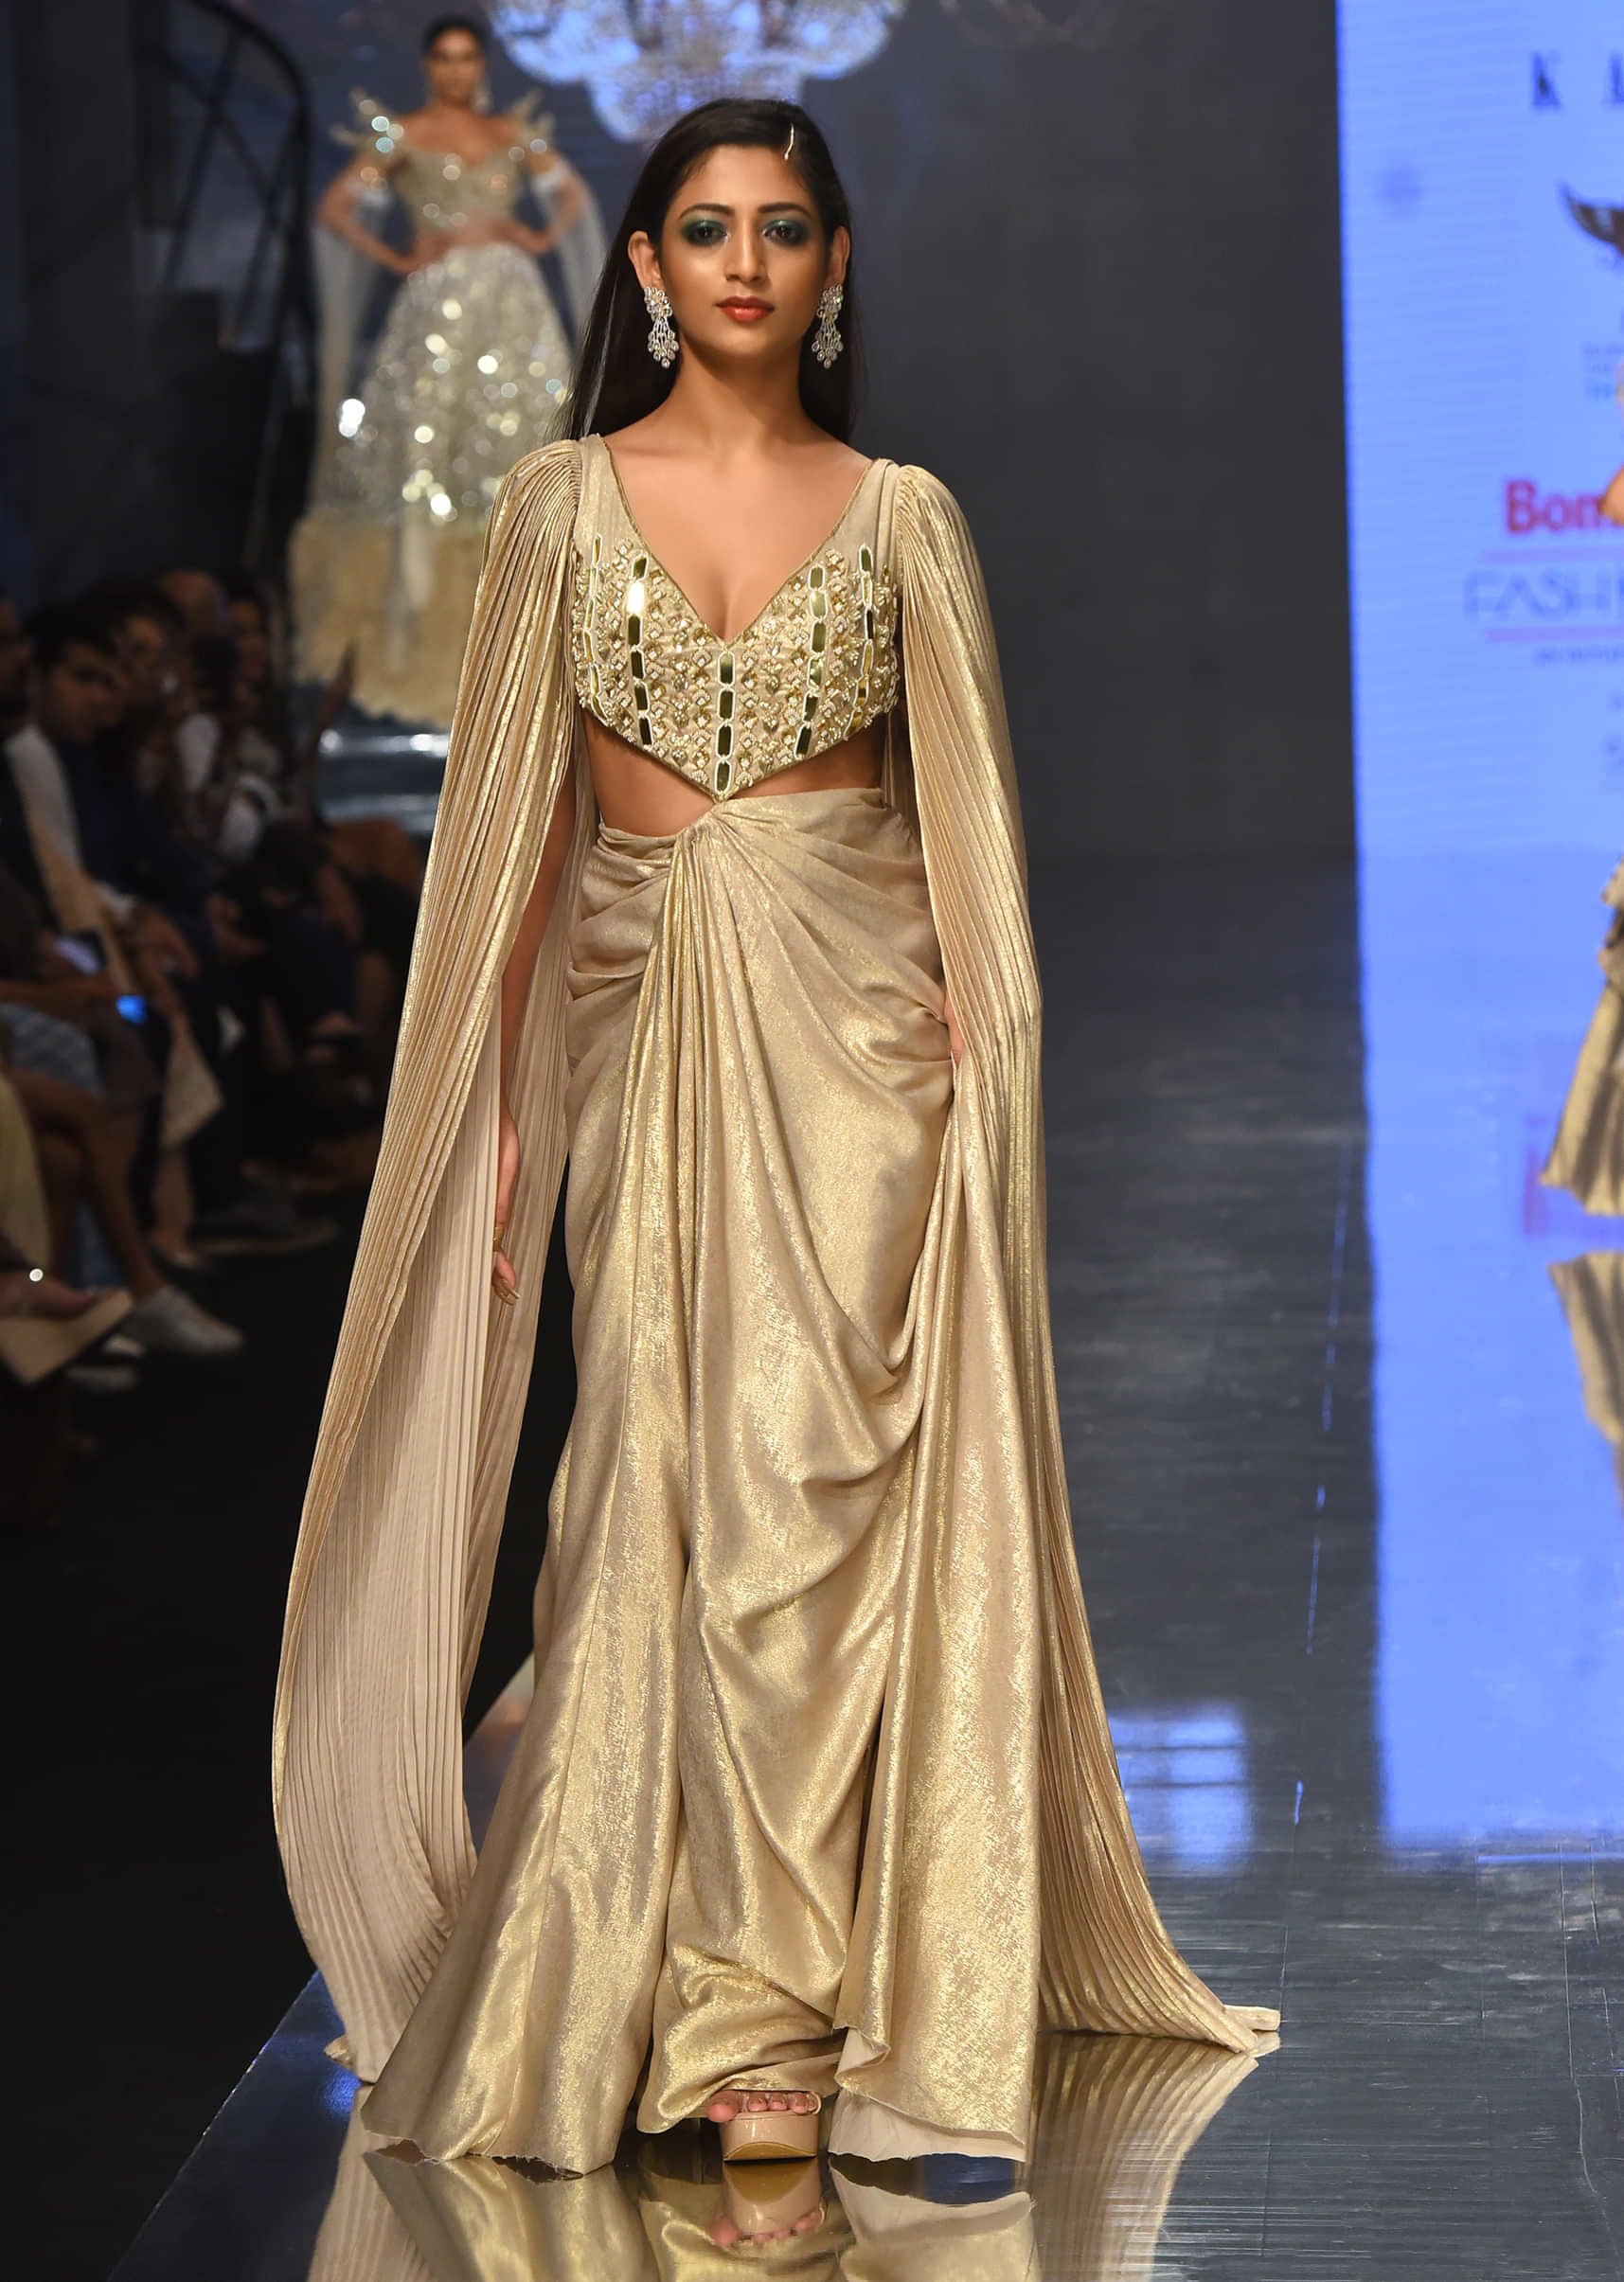 Mocha Brown Gown With A Pre-Pleated Dhoti Skirt And Royal Cape Sleeves - NOOR 2022